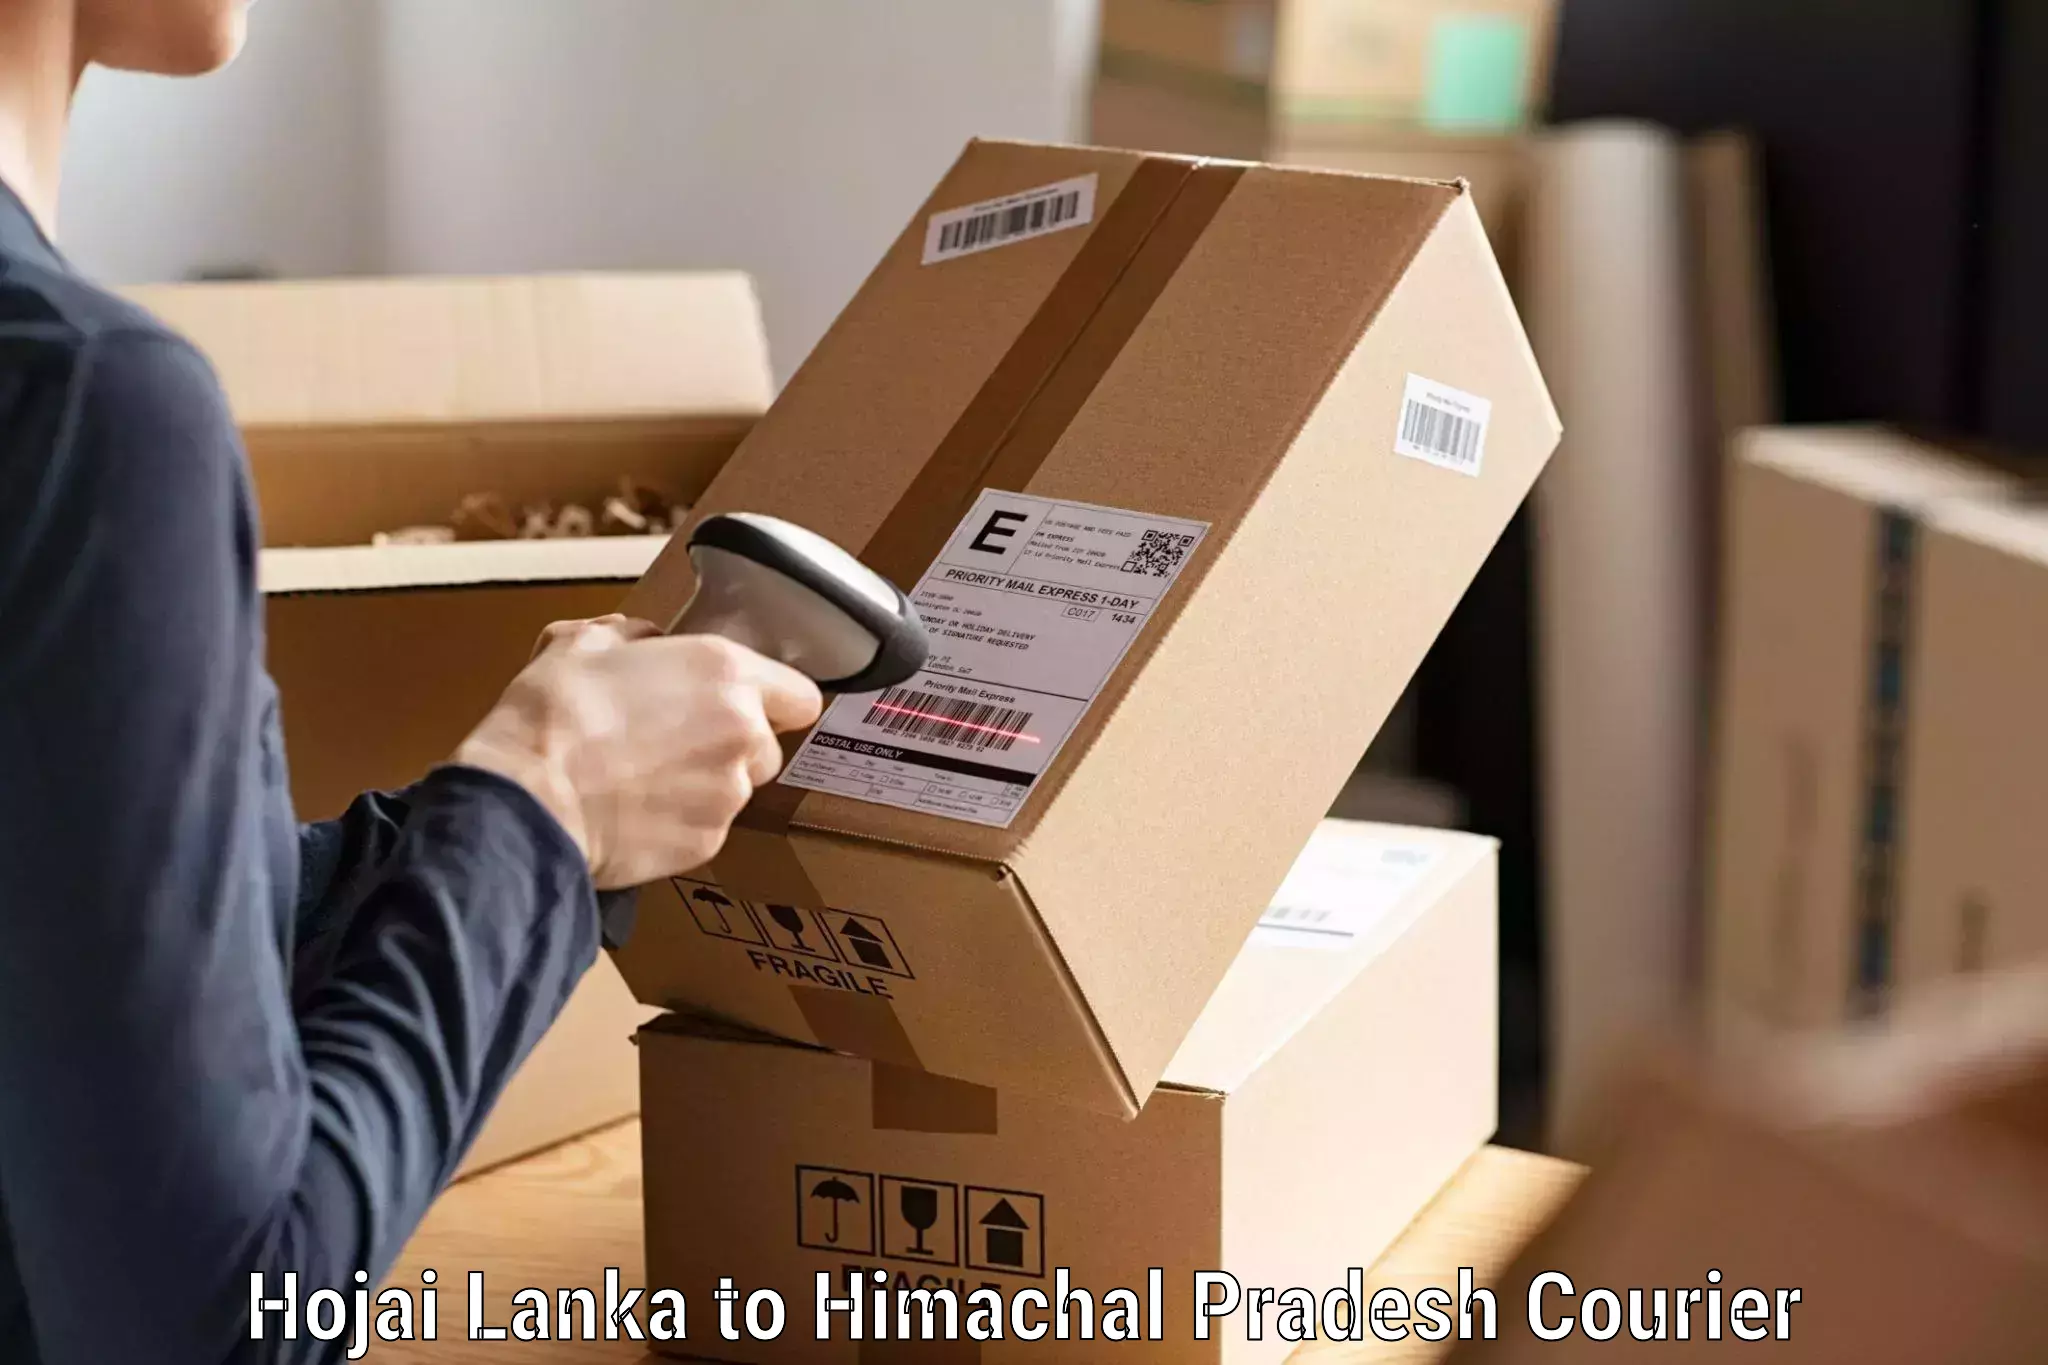 State-of-the-art courier technology Hojai Lanka to Dheera